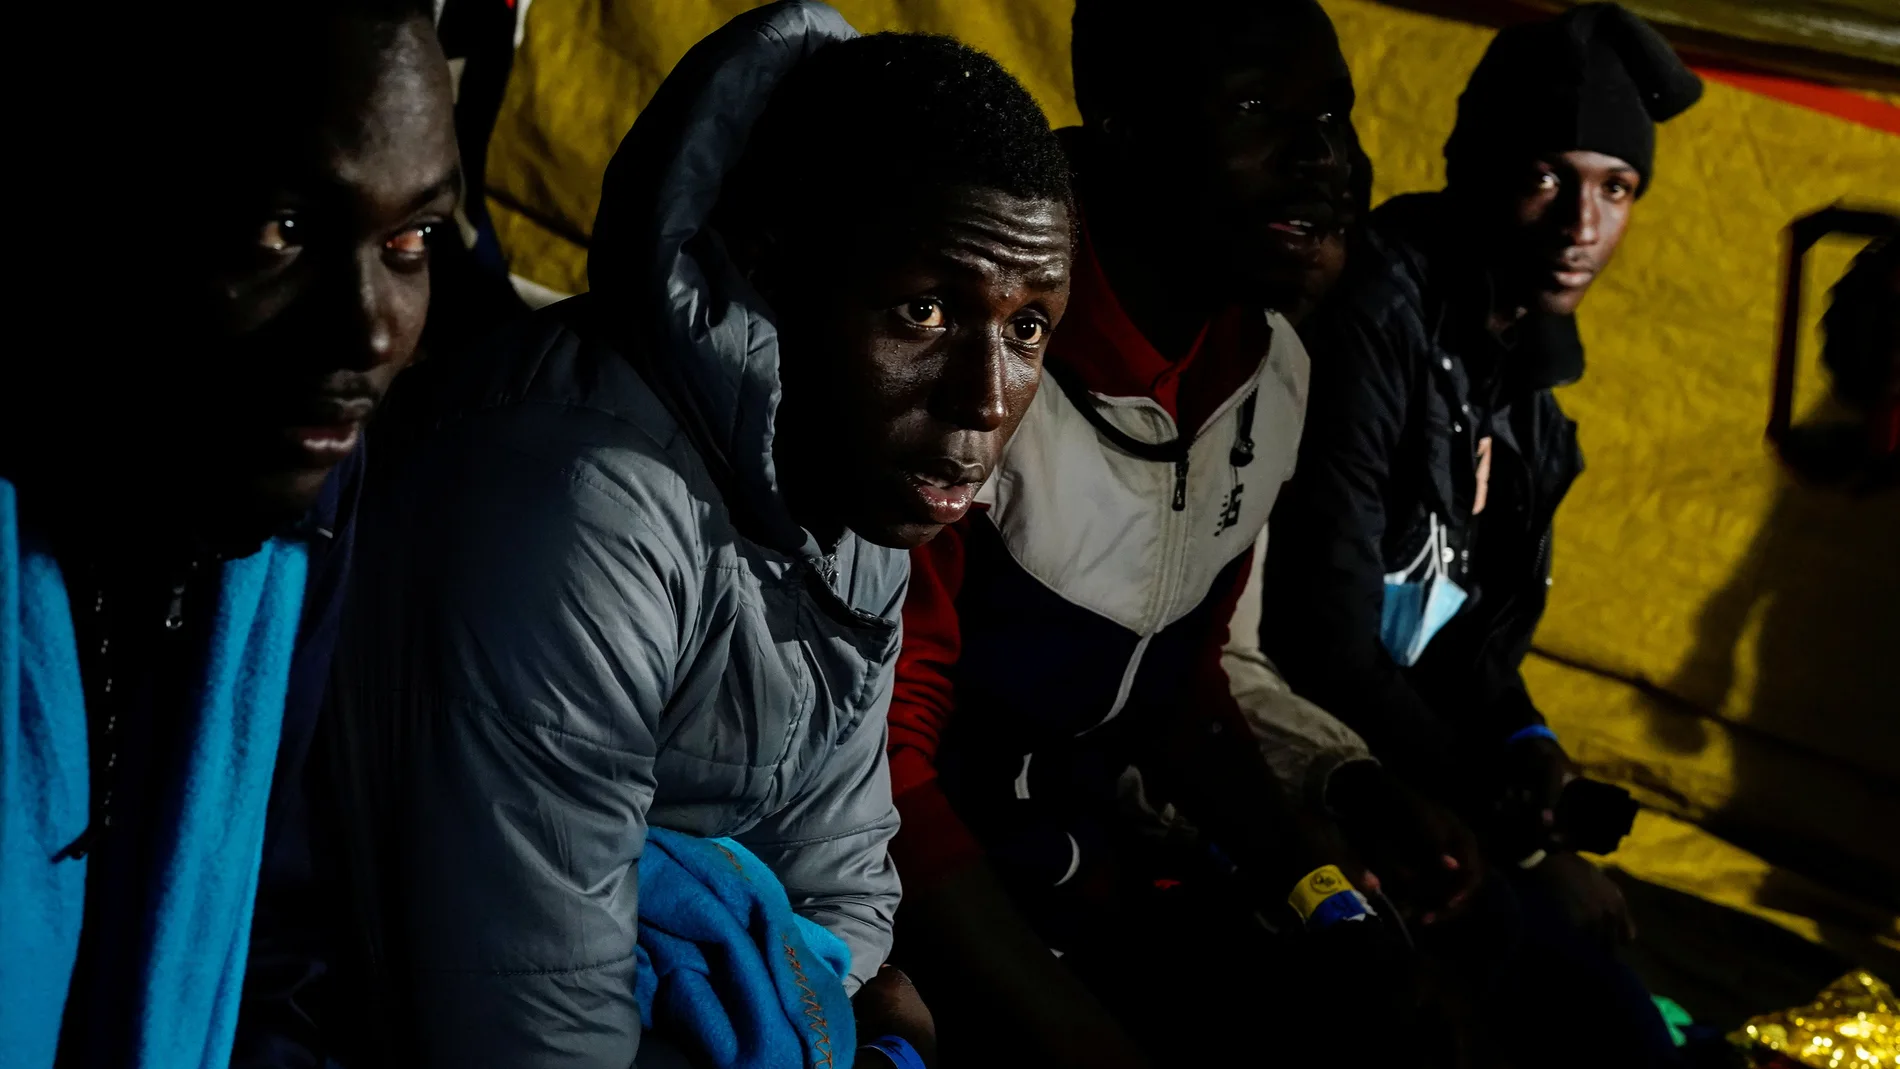 Migrants rest onboard the Proactiva Open Arms NGO rescue boat, sailing the Mediterranean Sea towards the Italian port of Taranto